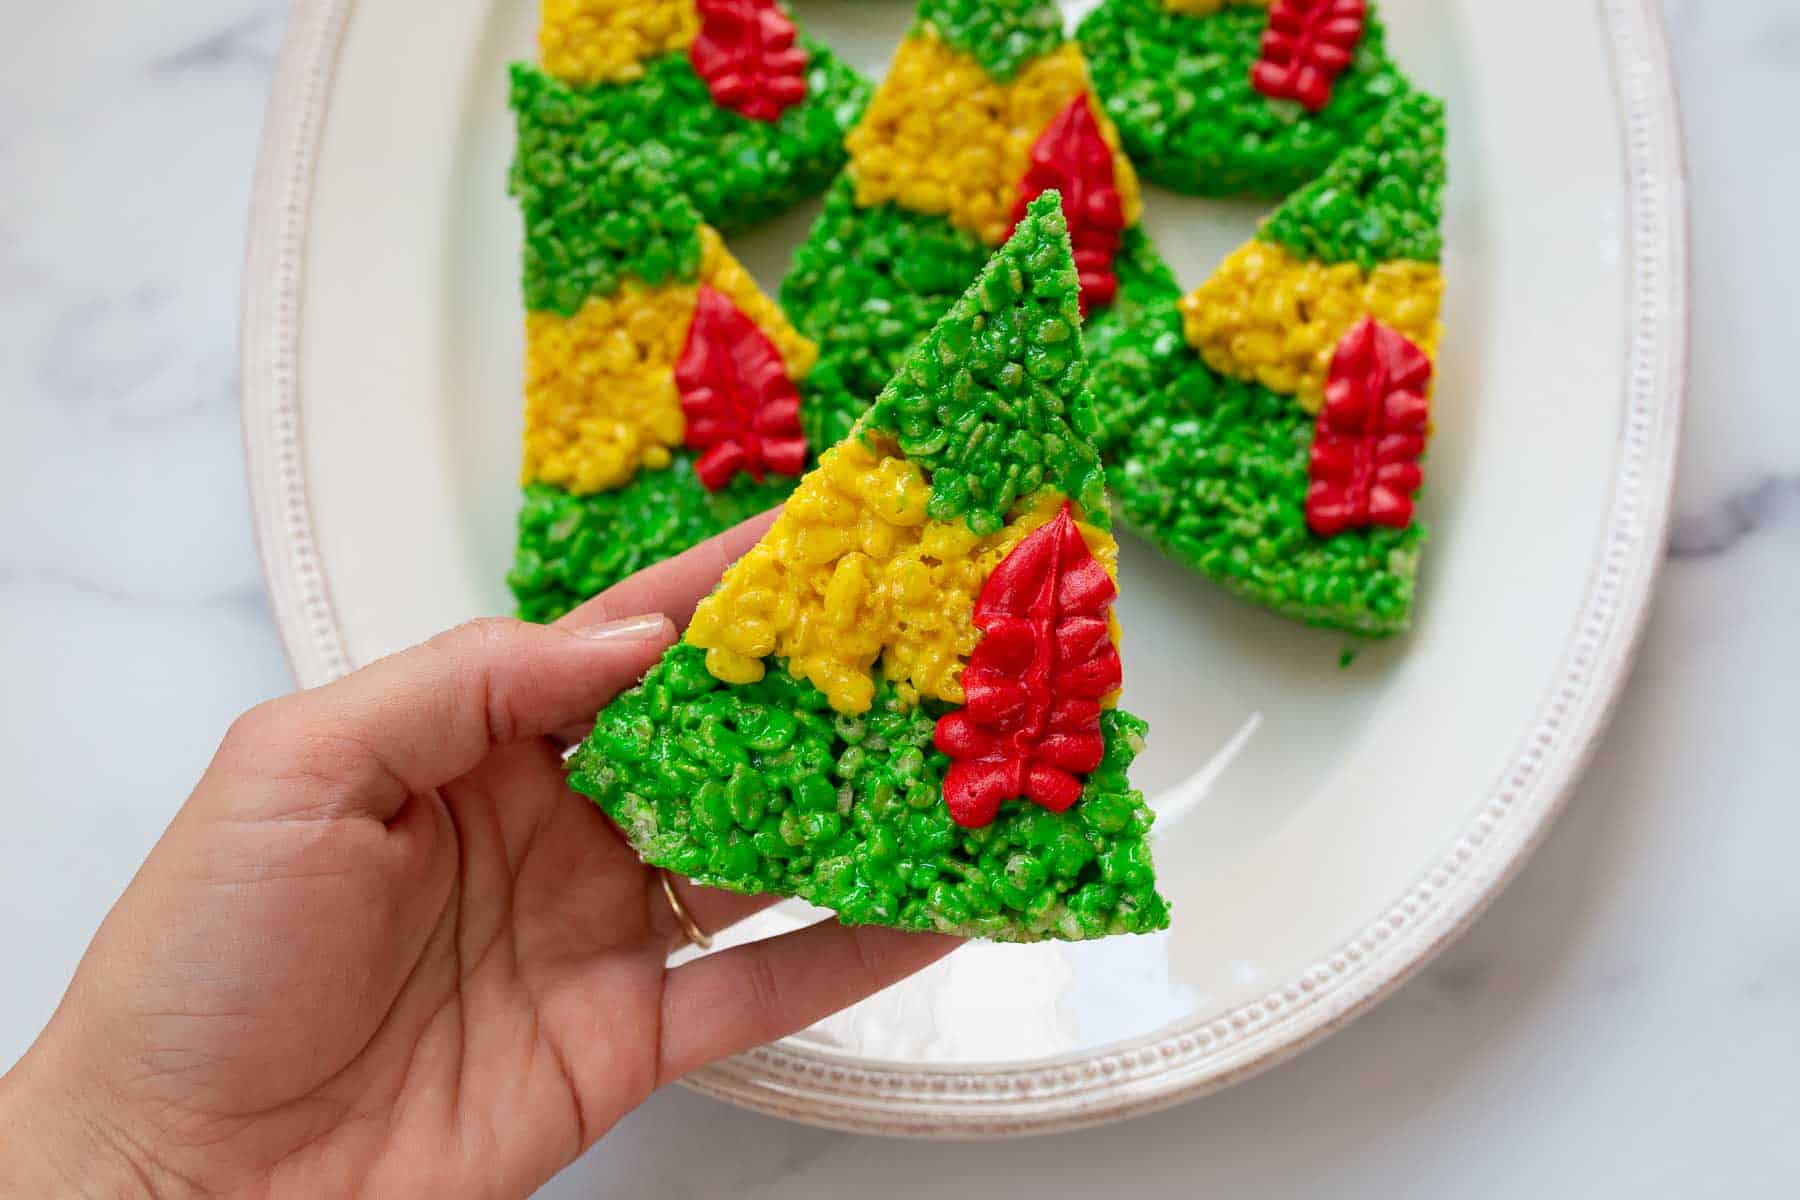 Hand holding buddy the elf hat Rice Krispie treats over a plate.